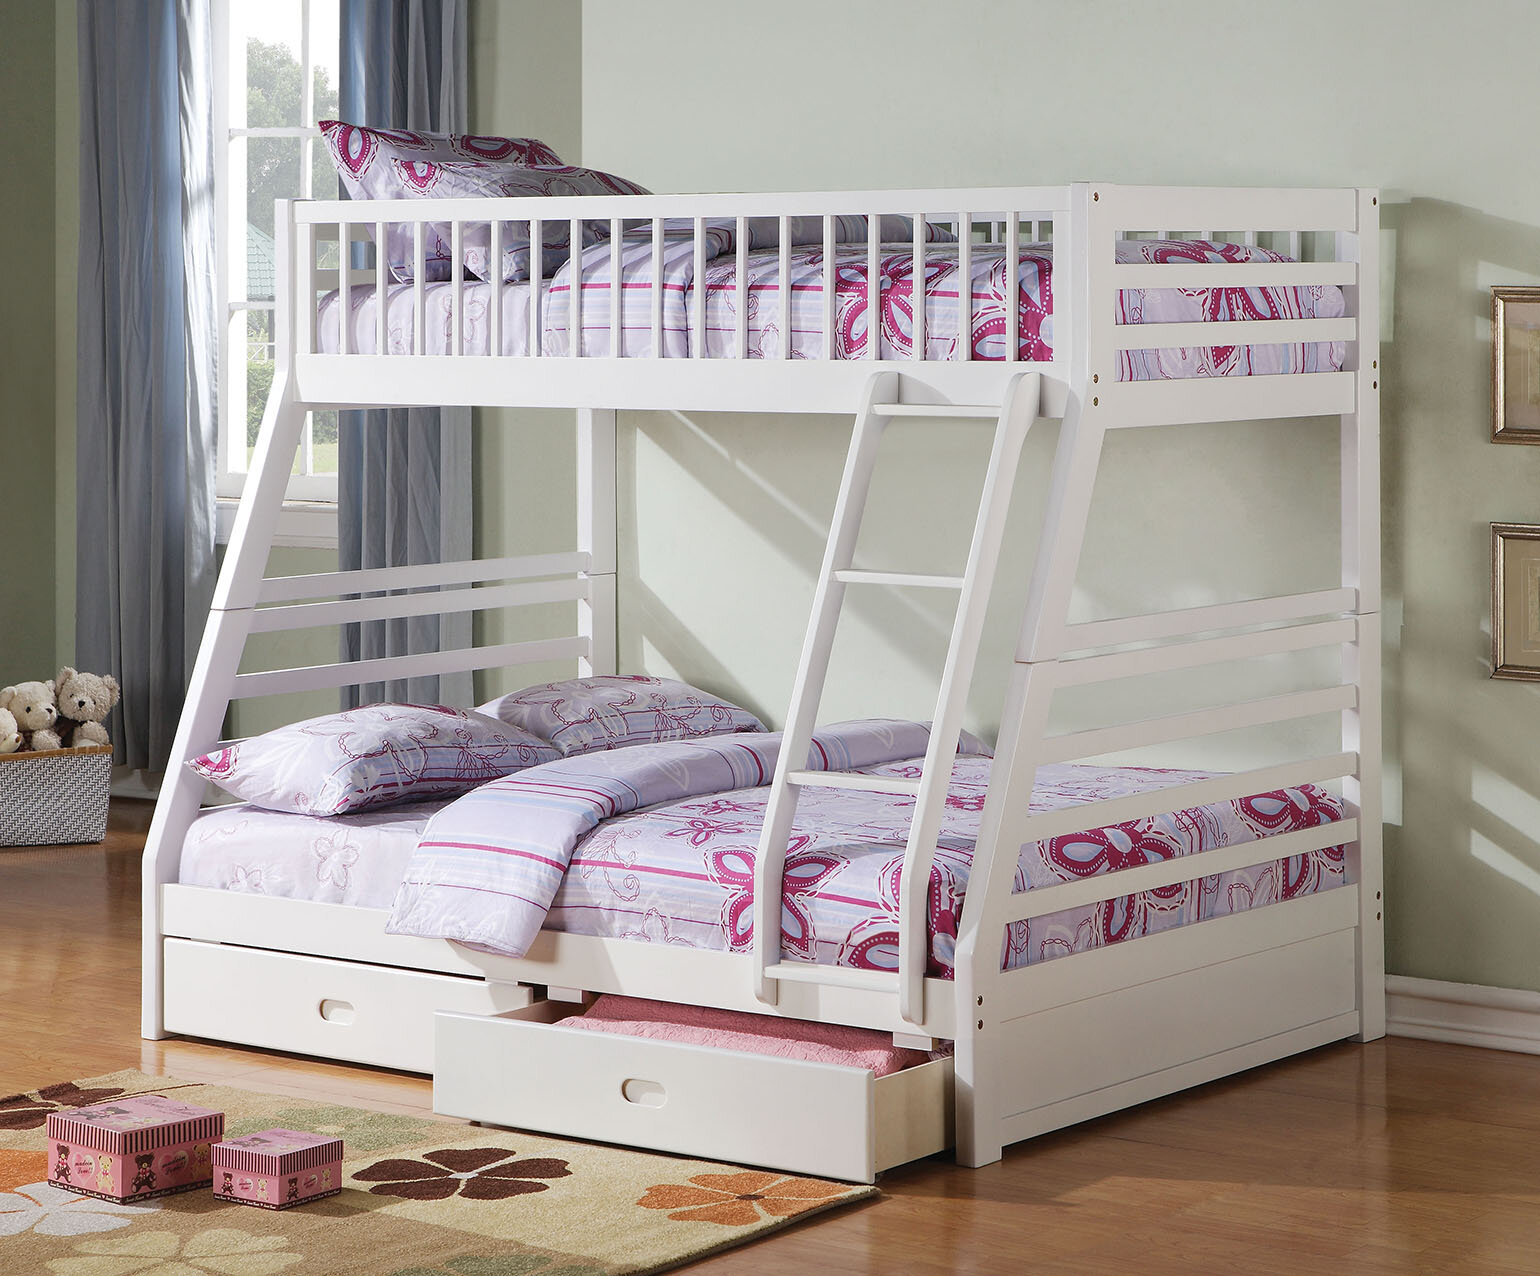 twin and full size bunk beds